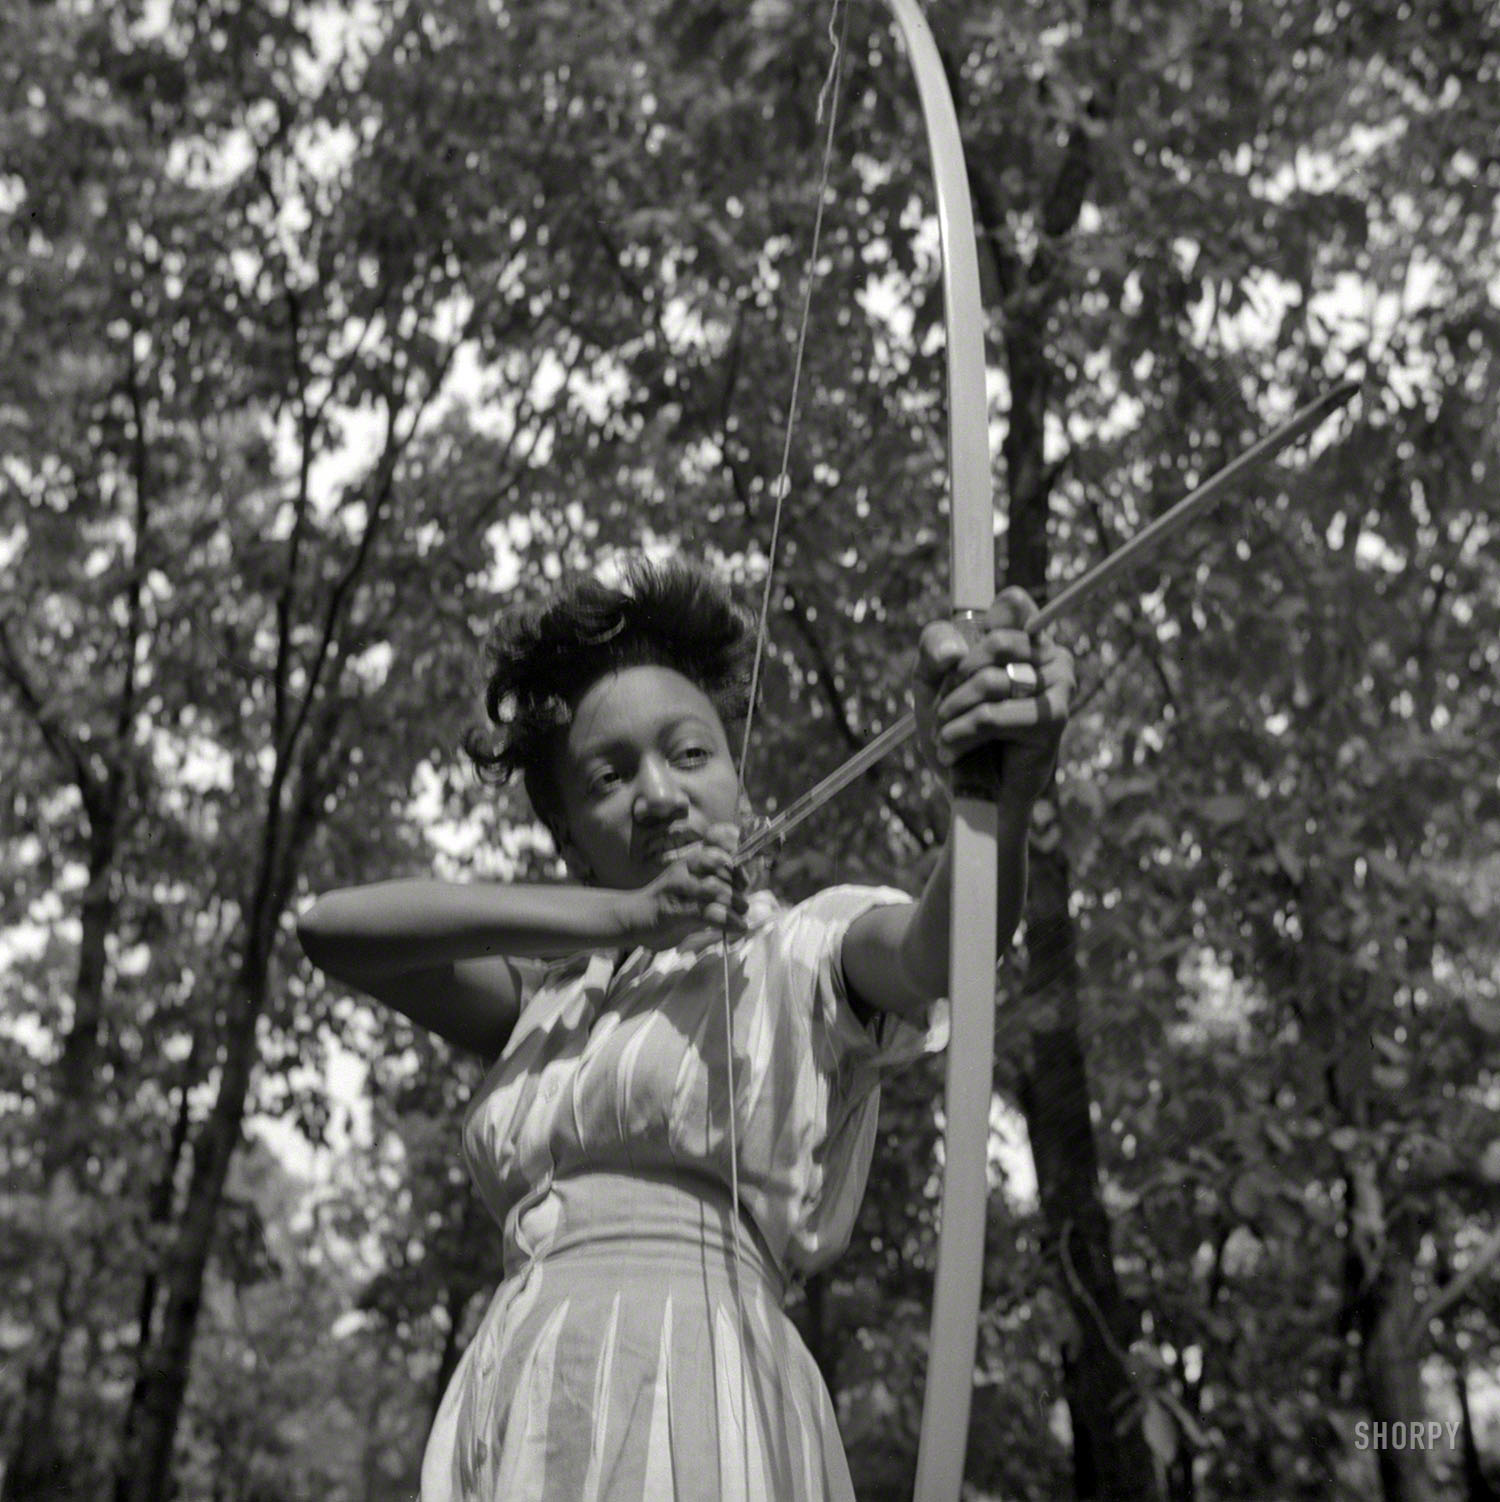 August 1943. "Bear Mountain, New York. Interracial activities at Camp Fern Rock, where children are aided by the Methodist Camp Service. Loretta Gyles of the Methodist Camp Service pulling a bow." Boys' Camp canoe at 11 o'clock! Photo by Gordon Parks for the Office of War Information. View full size.